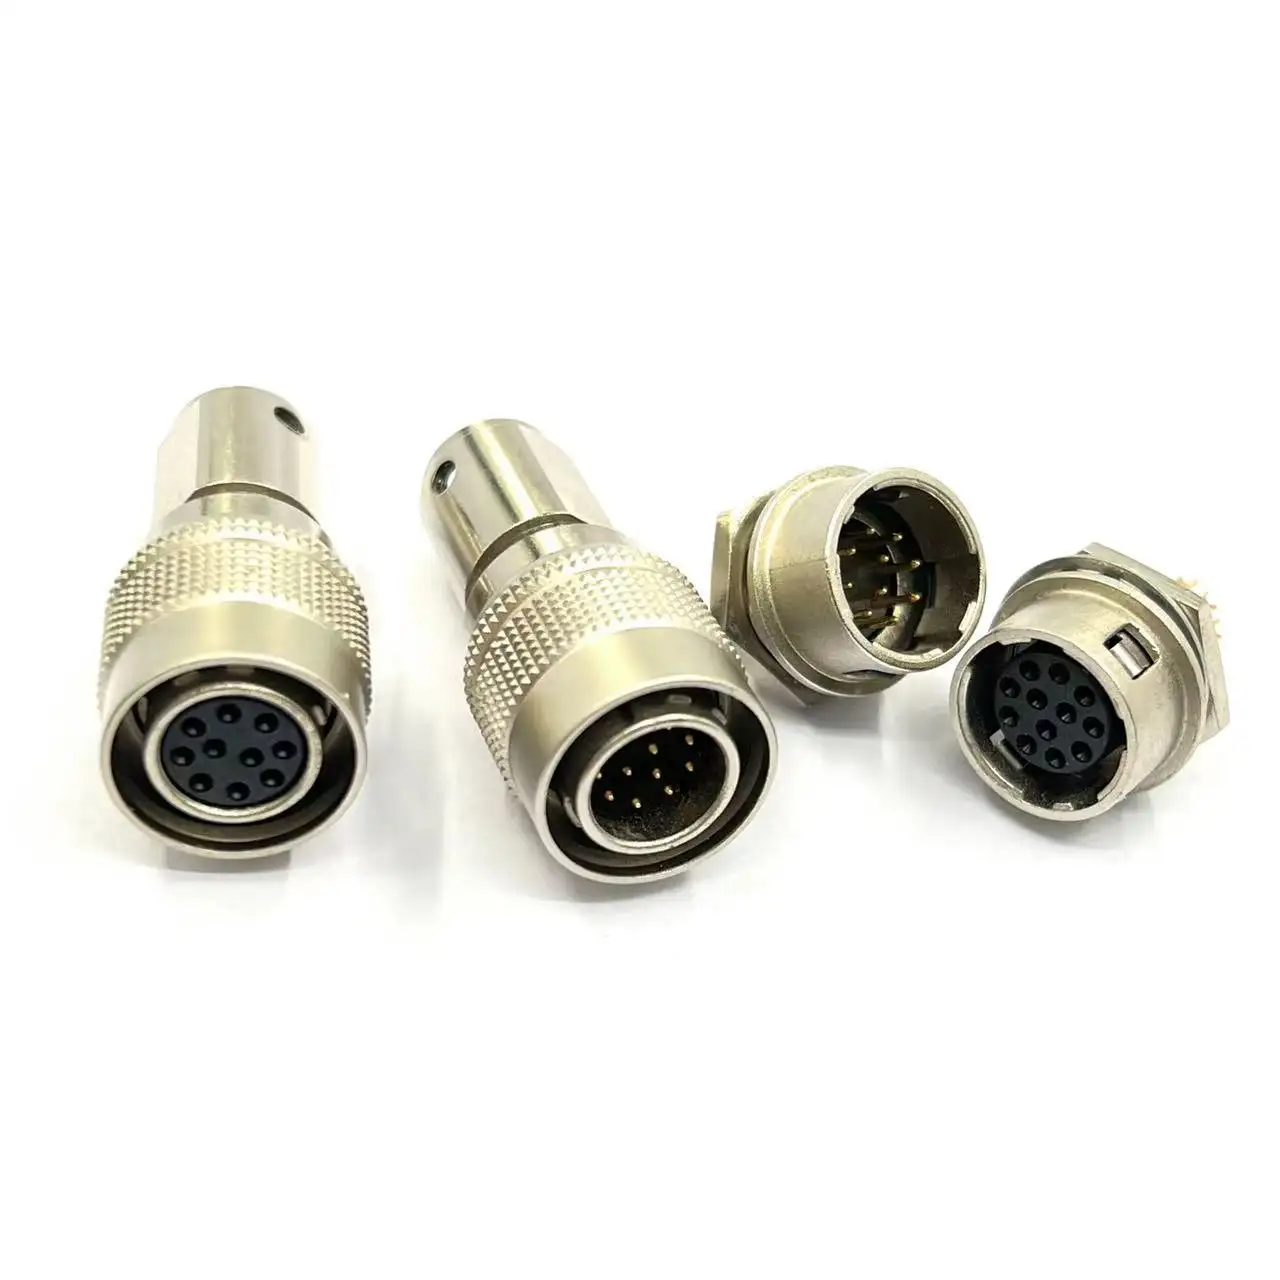 HR10 Hirose replacement 6 Pin Male Connector with female contacts Audio Video Camera Plug